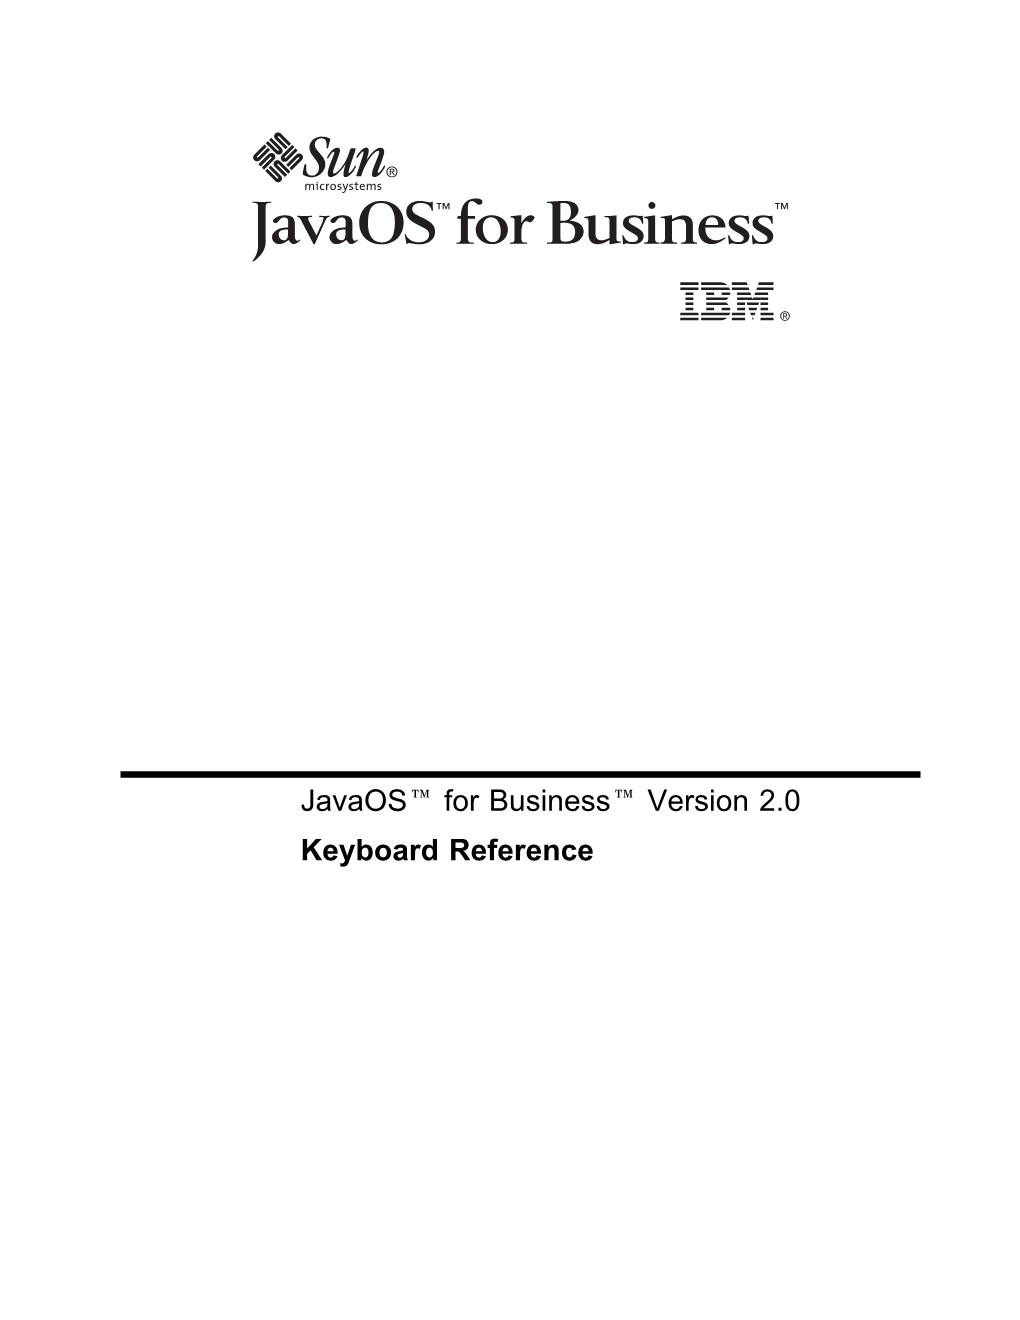 Javaos™ for Business™ Version 2.0 Keyboard Reference